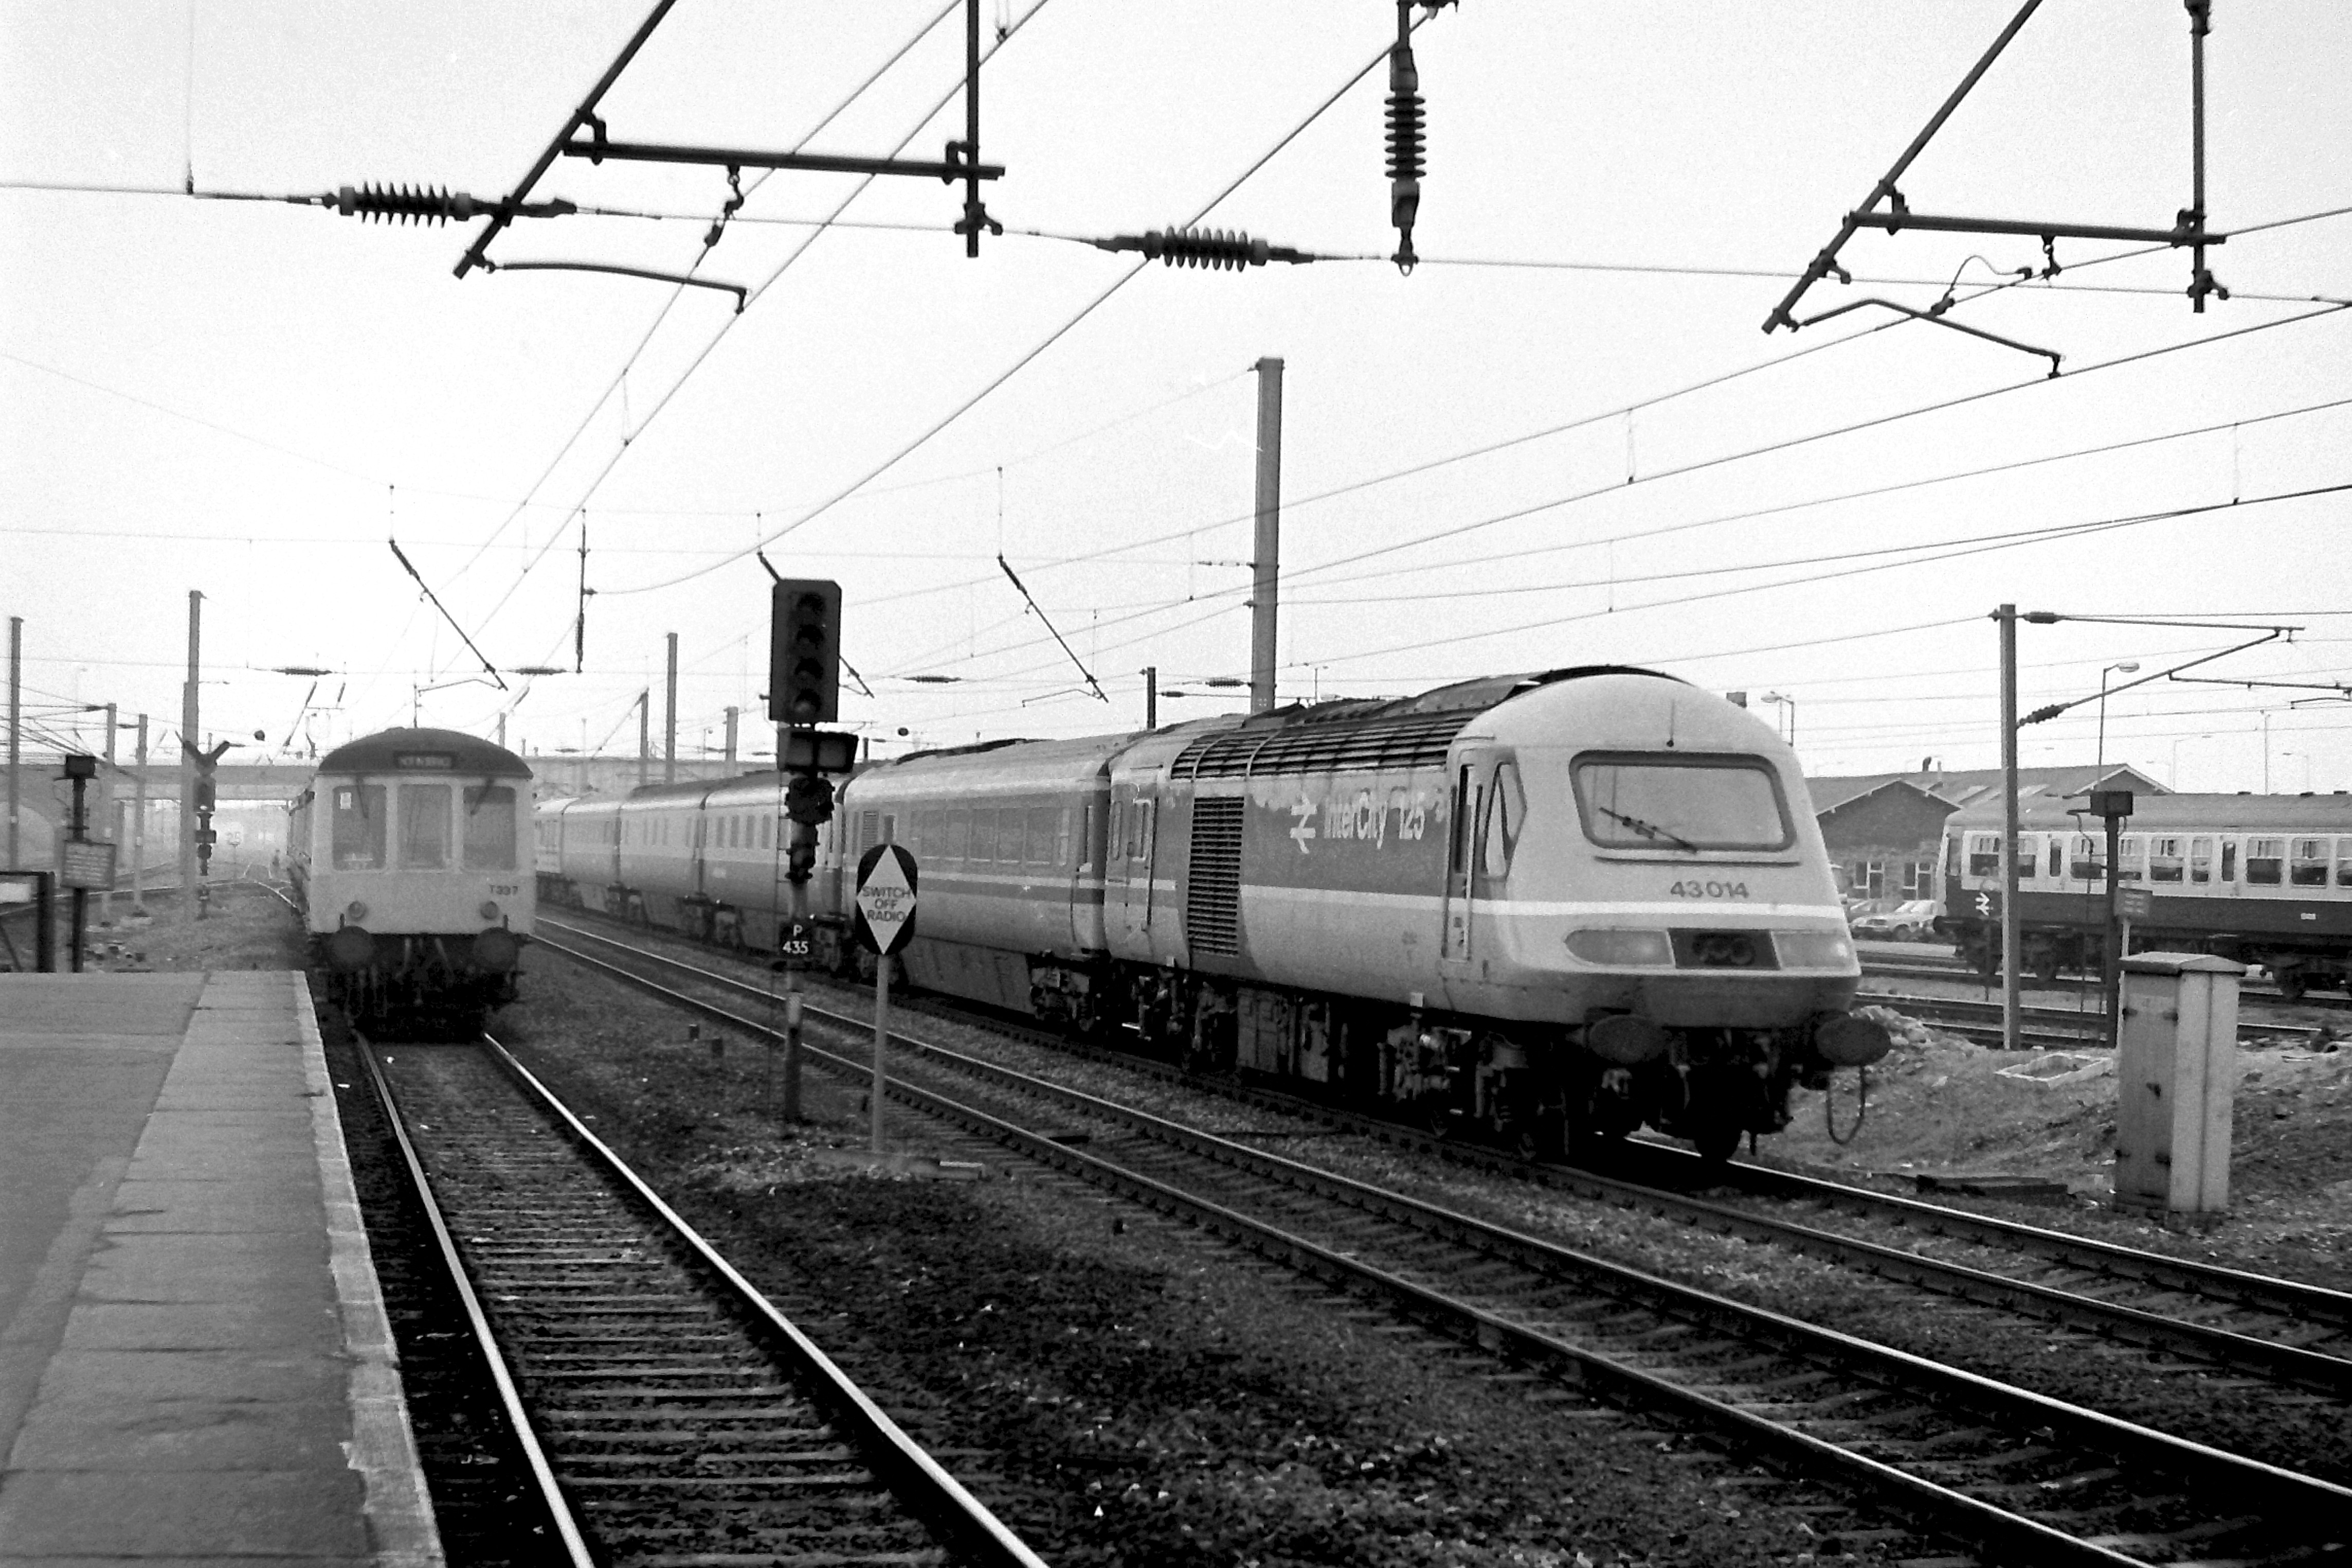 During the trial/testing phase of the ECML Class 91’s 43014 was modified to enable it to assist in the testing programme and was fitted with a set of buffers. The livery was also heavily modified at the time of the change-over; it is seen passing through Peterborough on a southbound test train on 29th June 1988.  The set number has been replaced by the power car’s number 43014 below the cab front window. Bob Green